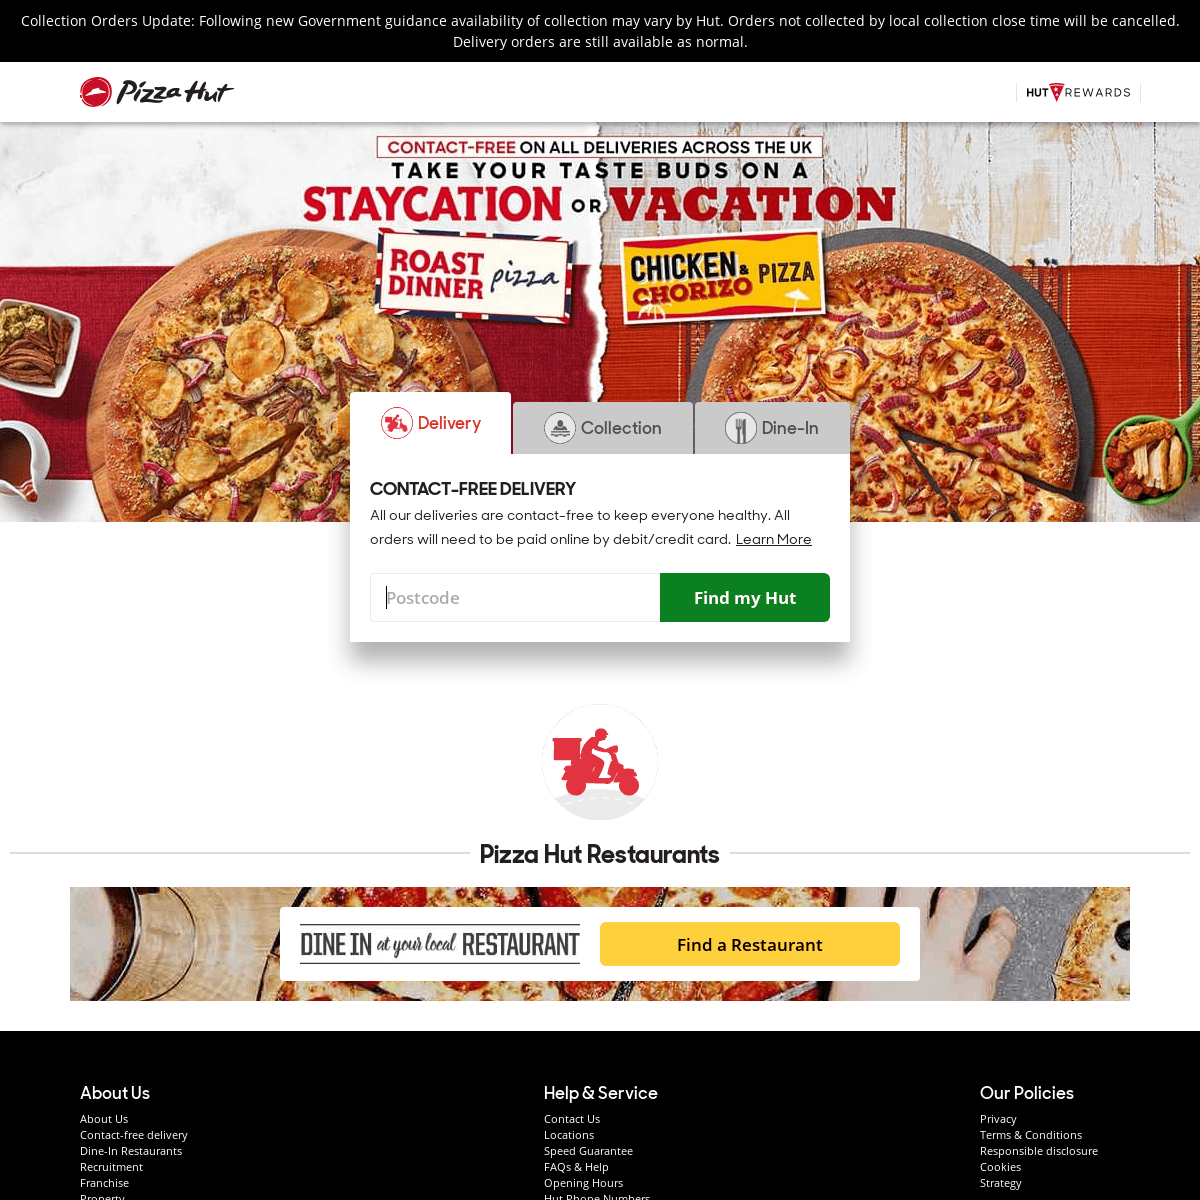 A complete backup of https://pizzahut.co.uk